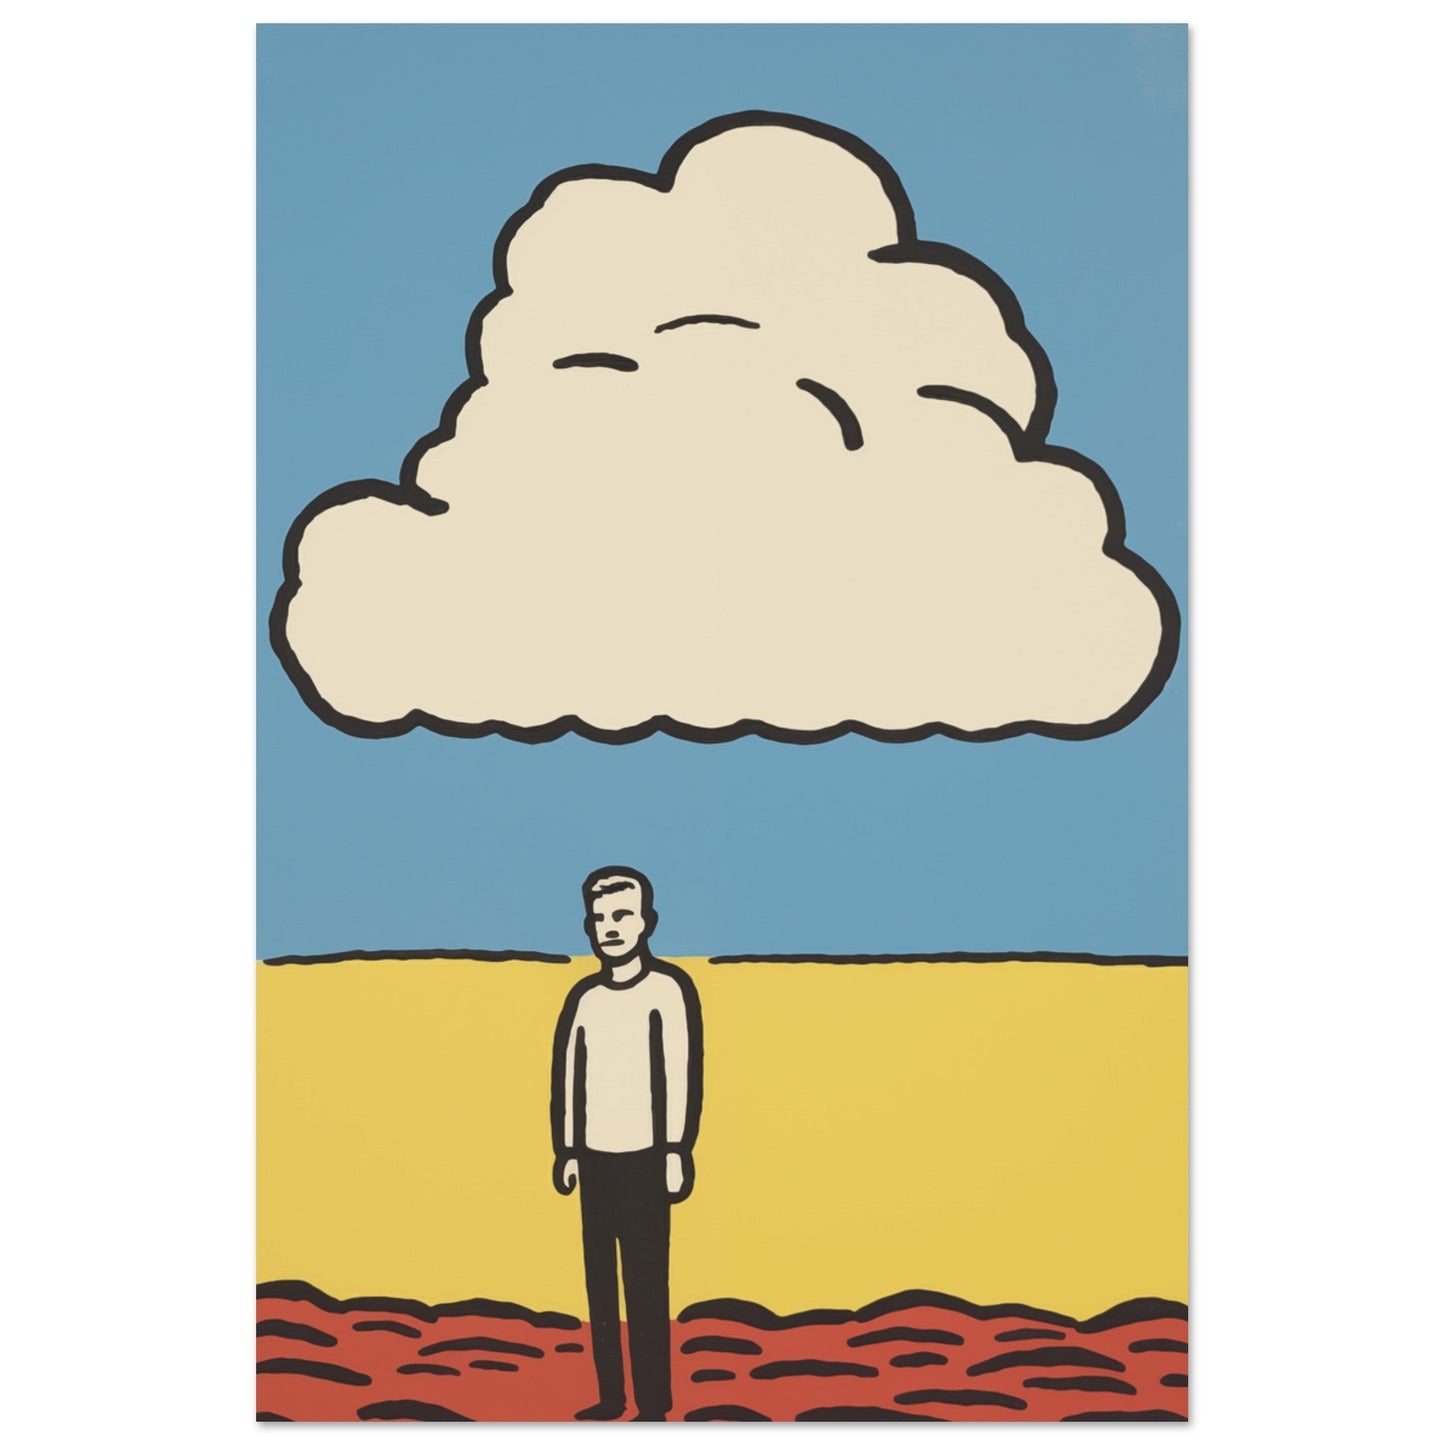 A colored wall art of In Reverie, a man standing in front of a cloud.